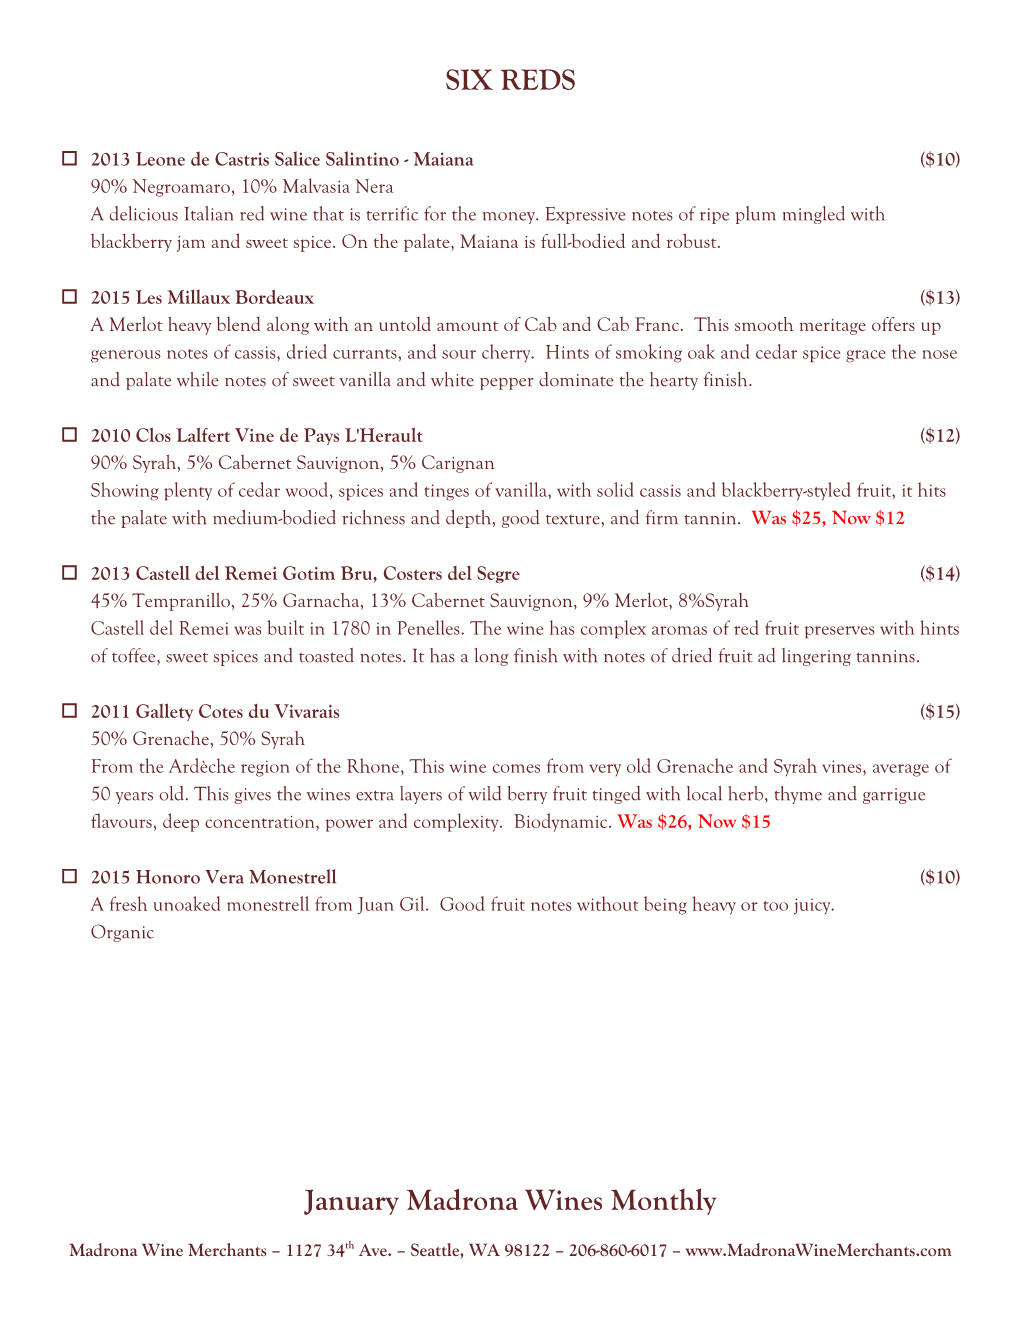 January Madrona Wines Monthly SIX REDS